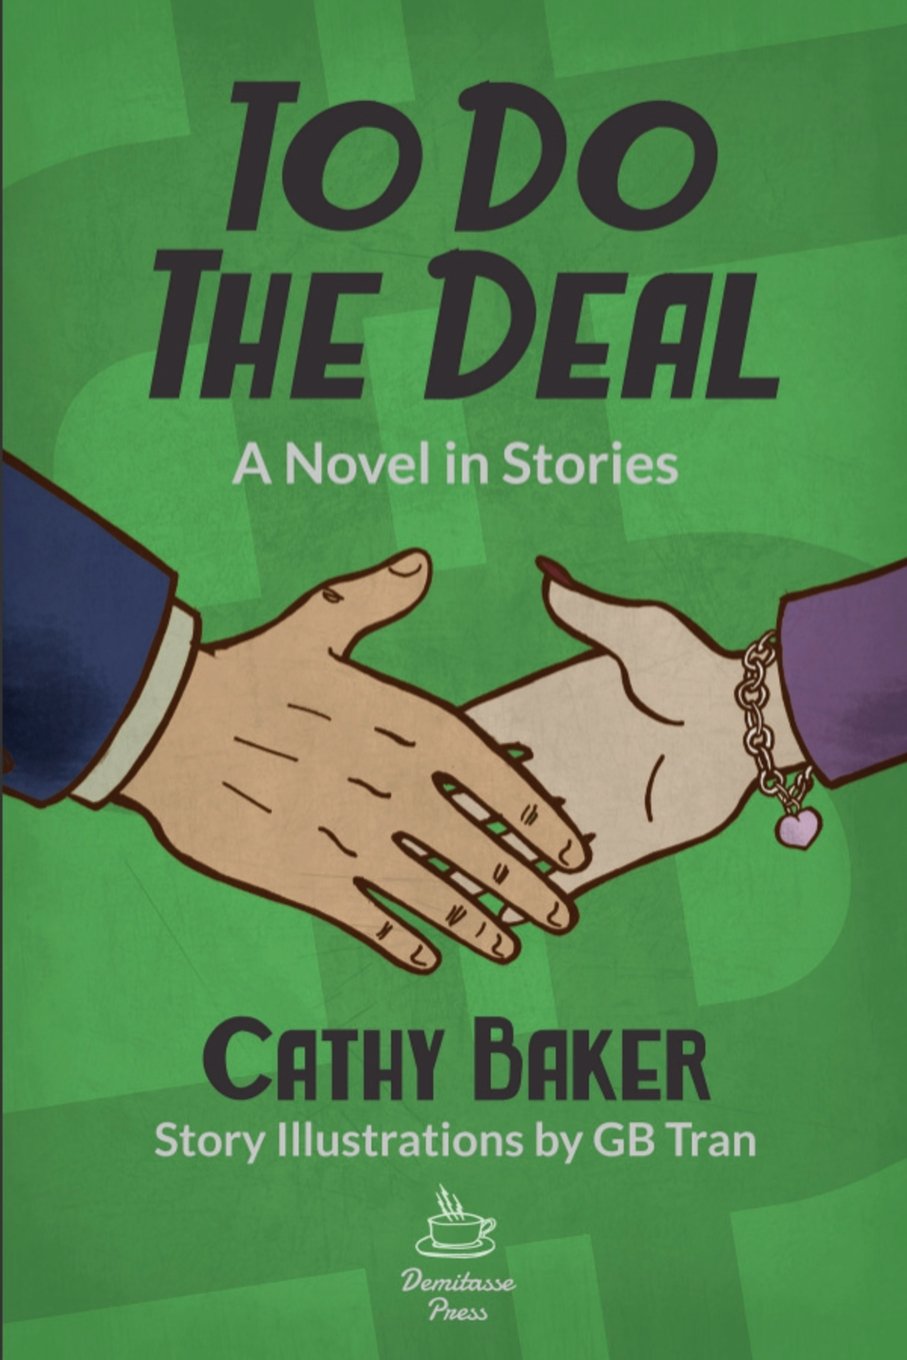 To Do the Deal, a Novel in Stories [Paperback] Baker, Cathy and Tran, Gb